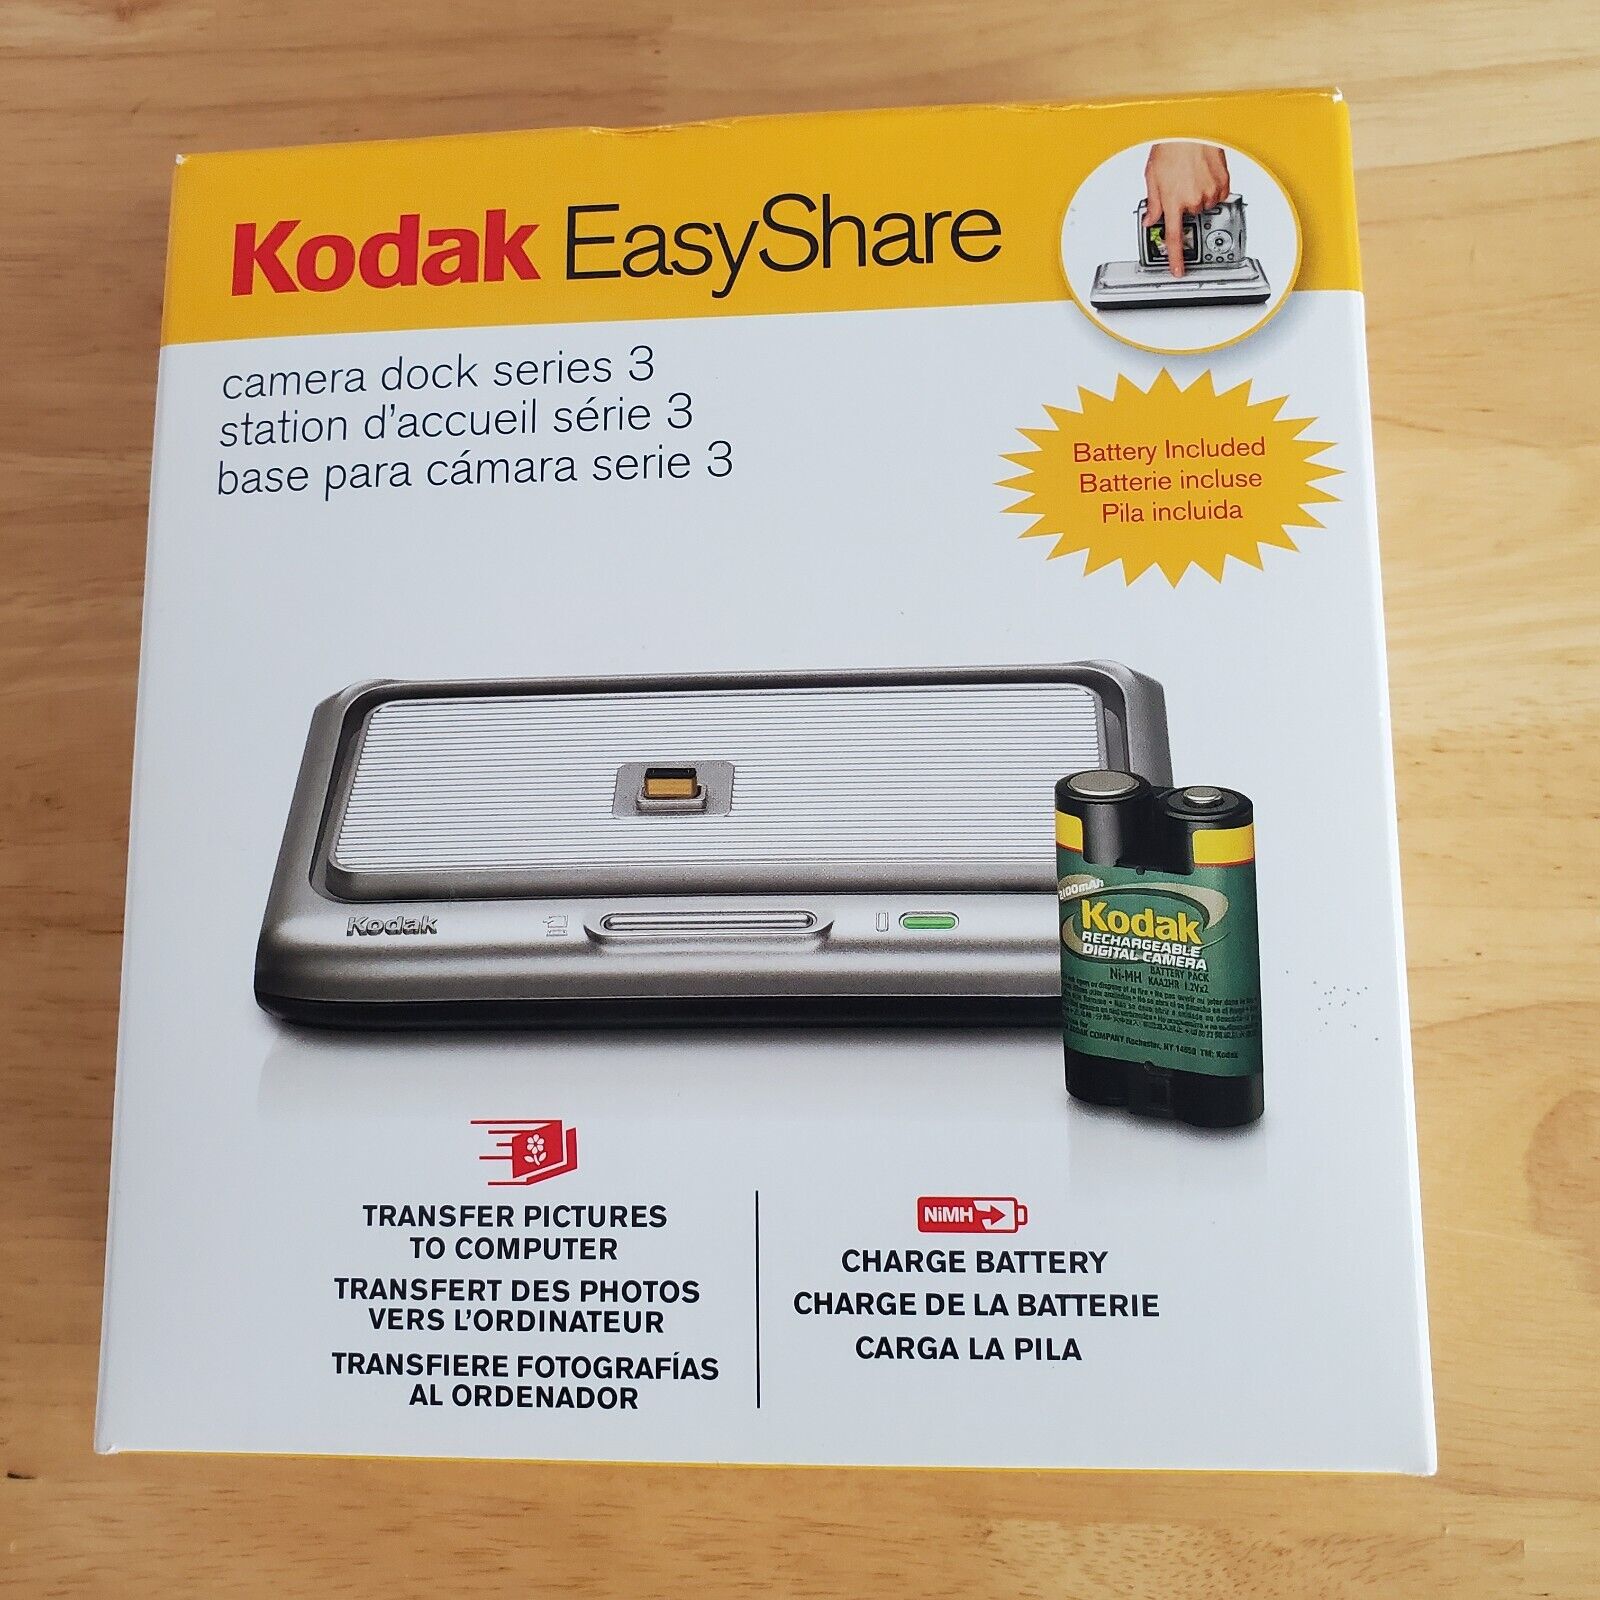 Kodak EasyShare Series 3 Camera Dock Transfer Pictures Charge Battery New Sealed